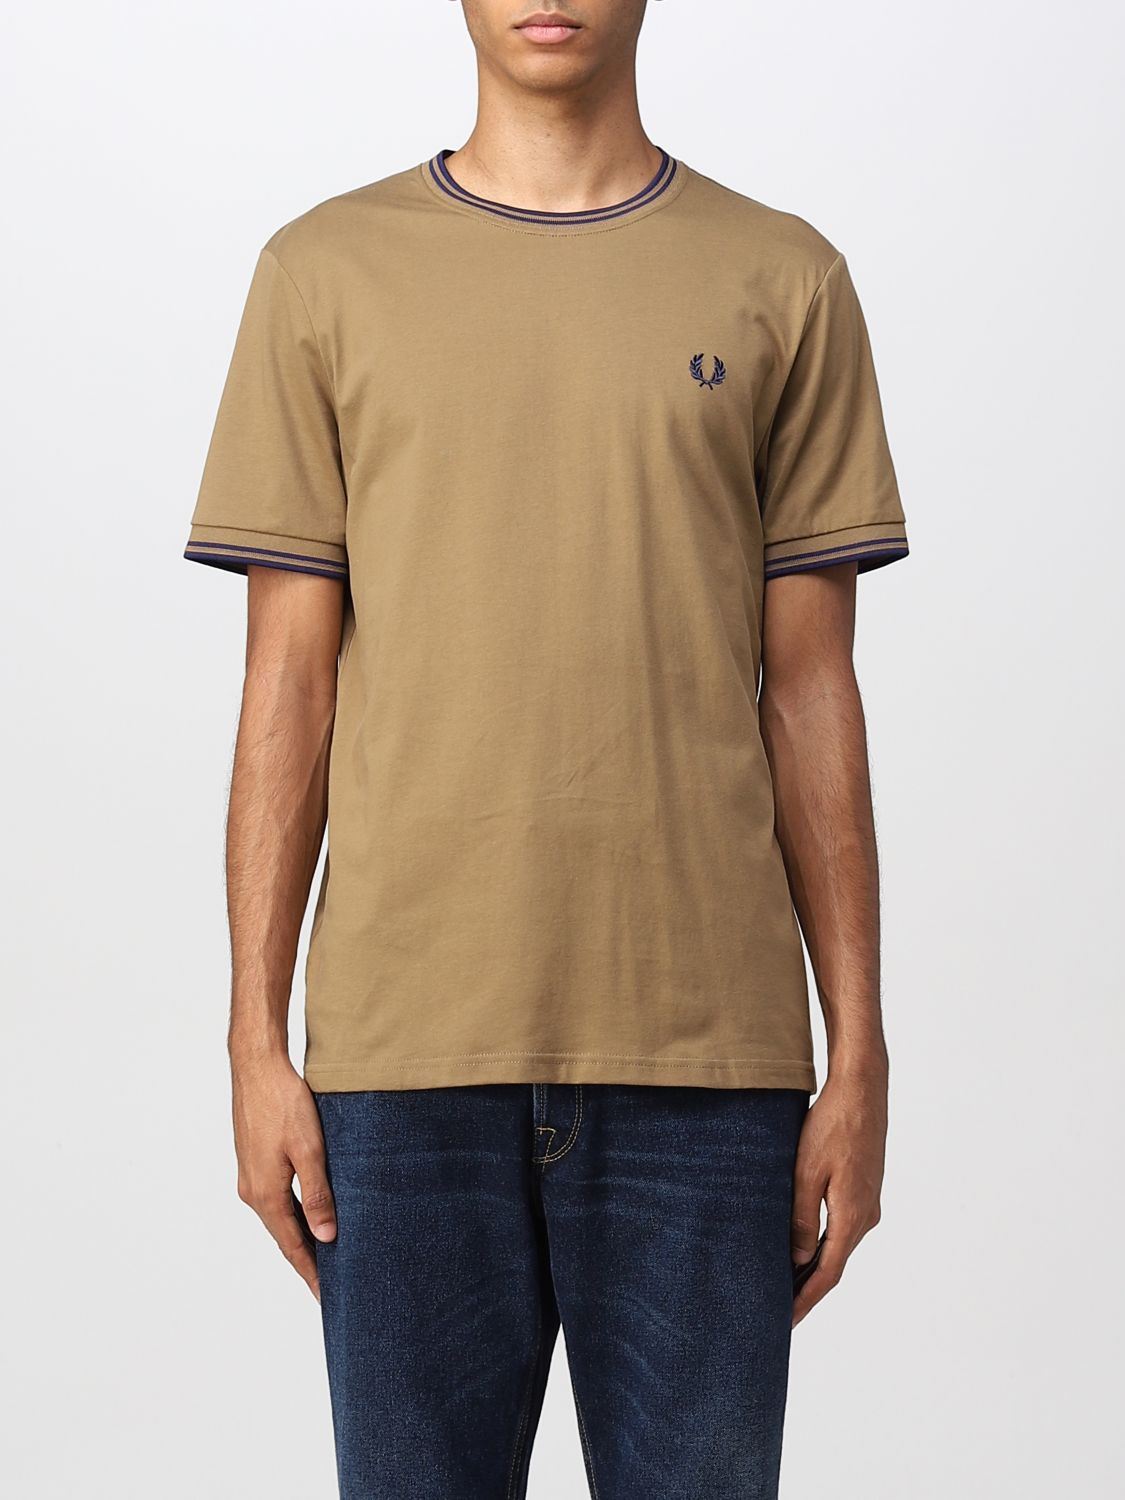 Camiseta Fred Perry: Camiseta Fred Perry para hombre marrón 1